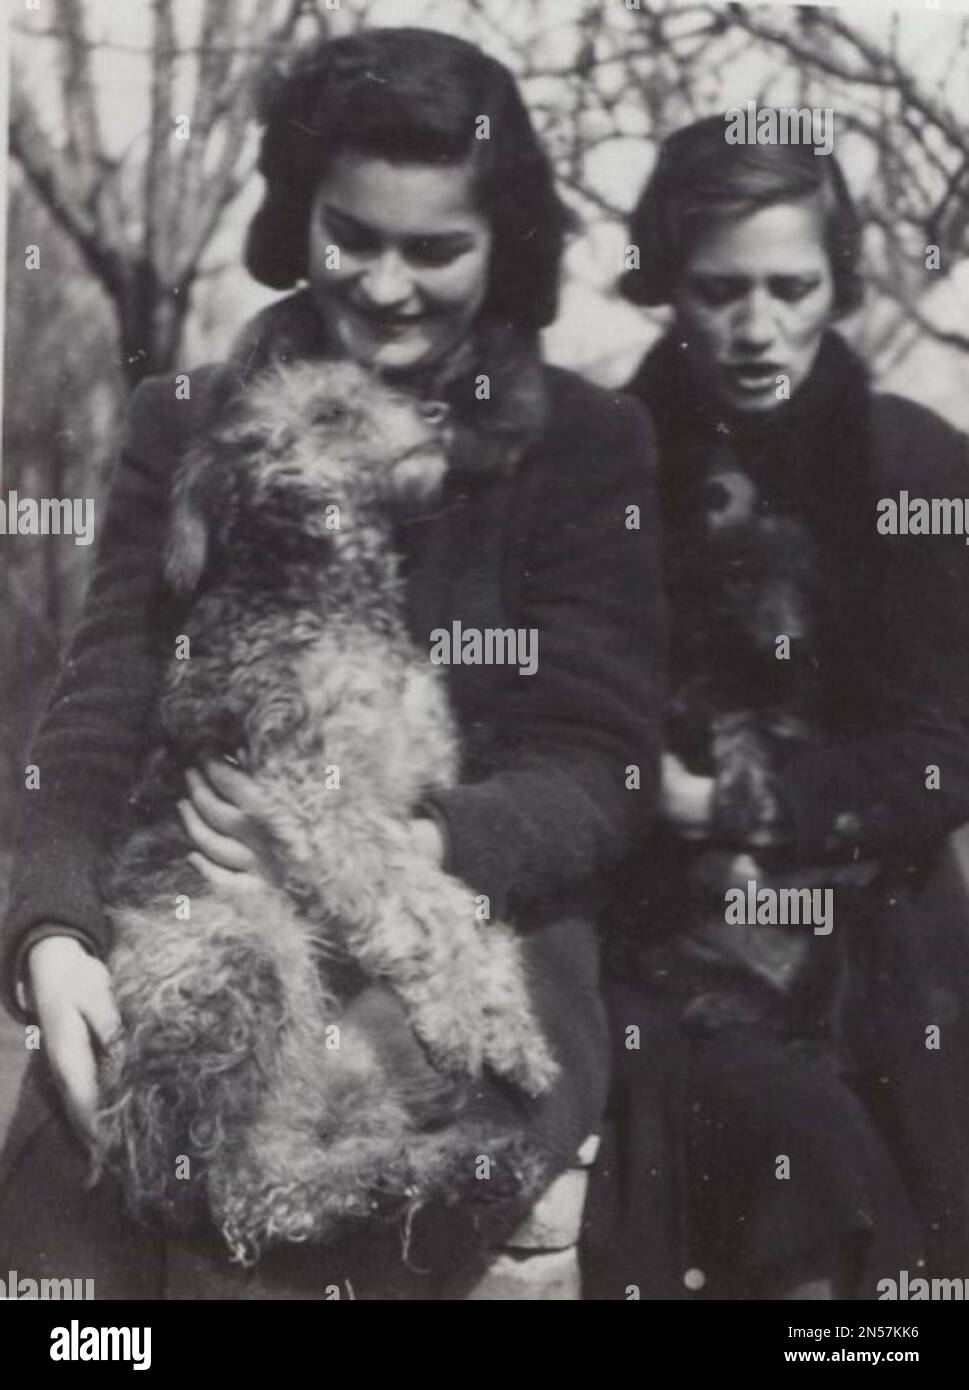 Vintage Photograph about pet dogs : hand holding puppy / hugging dogs / Dog Hugs Young ladies with big smile on them face holding them little dogs in them arm at the 1930s.  One dog is wire-haired dog the other is a little black dog. / Holding dog under arm Stock Photo